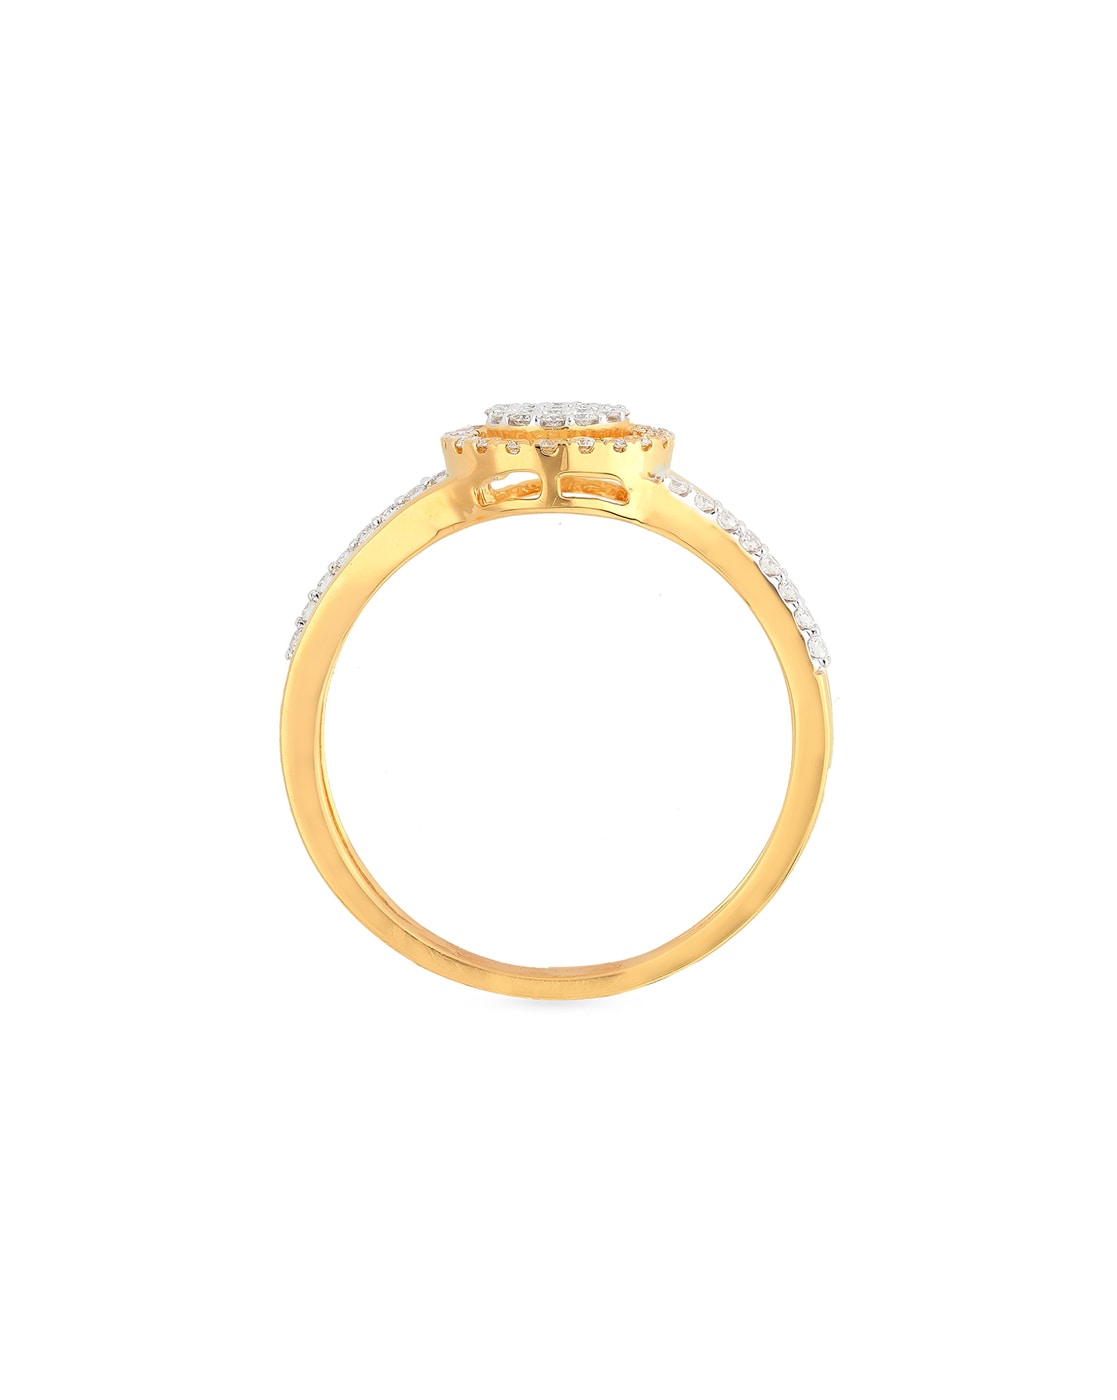 Buy Tehzeeb Creations Golden Colour Ring With Golden Stone Online at Best  Price | Distacart